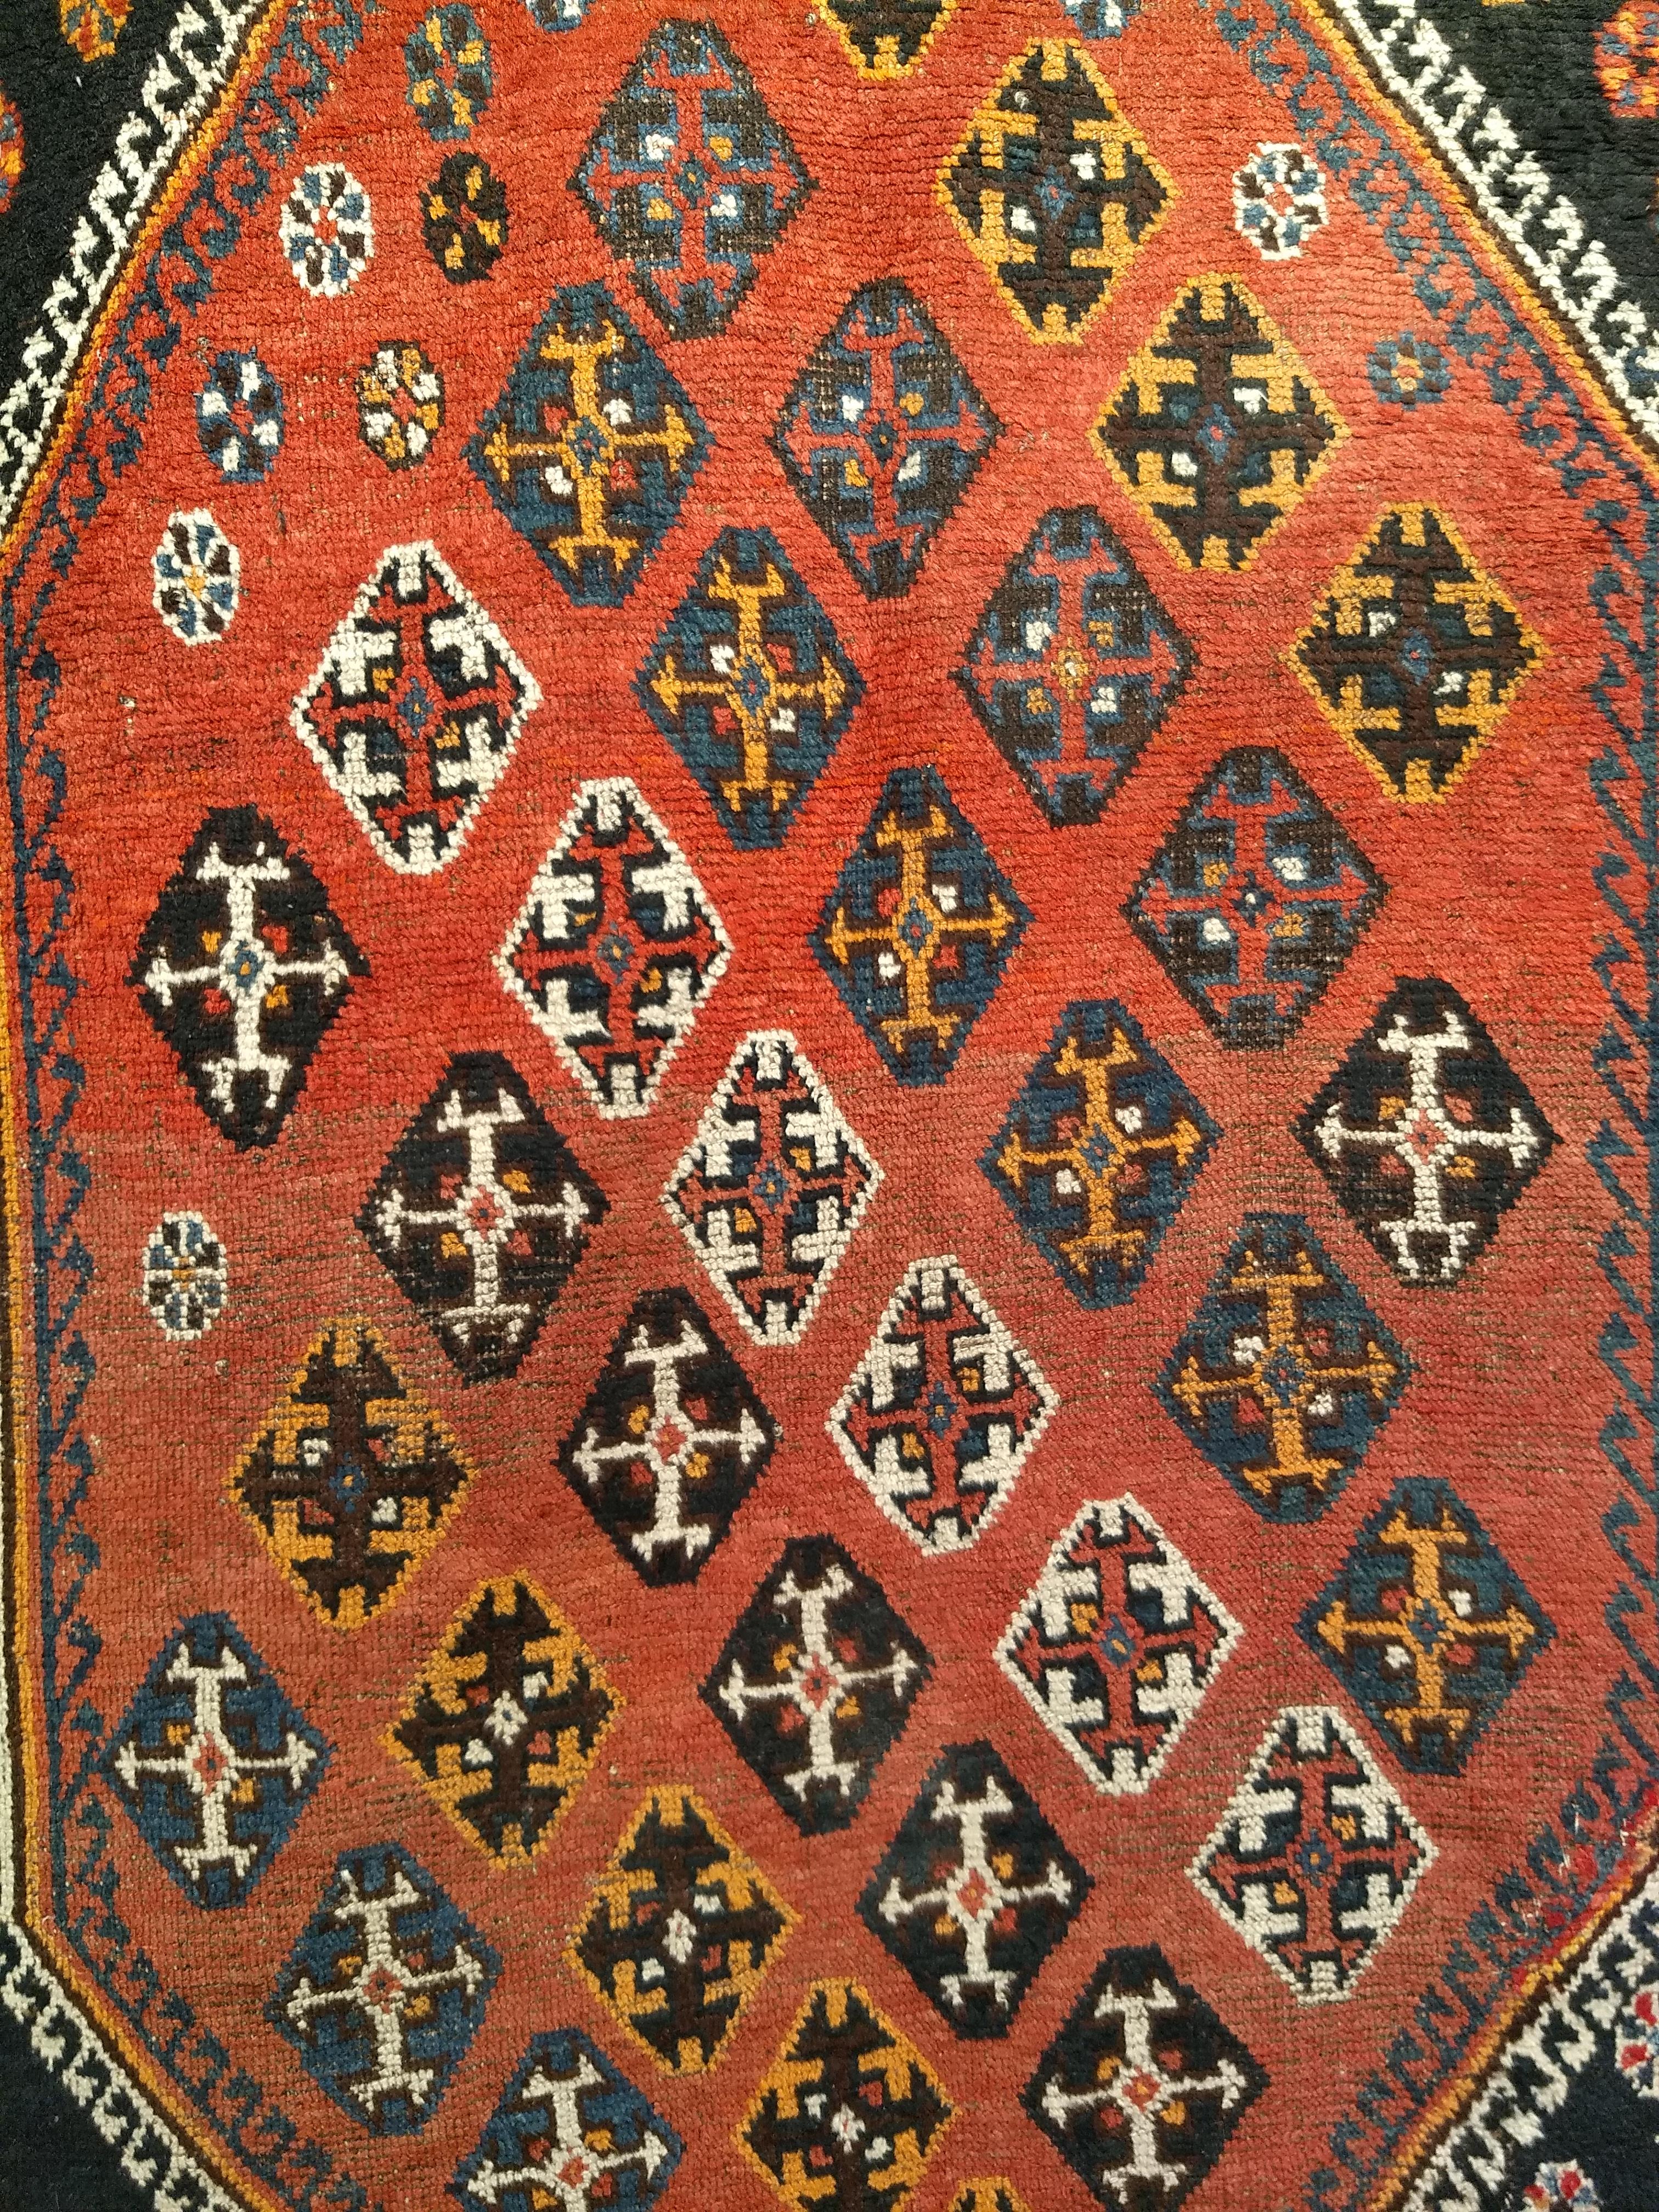 20th Century Vintage Persian Qashqai Tribal Area Rug in Rust, Ivory, Blue, Yellow, Black For Sale